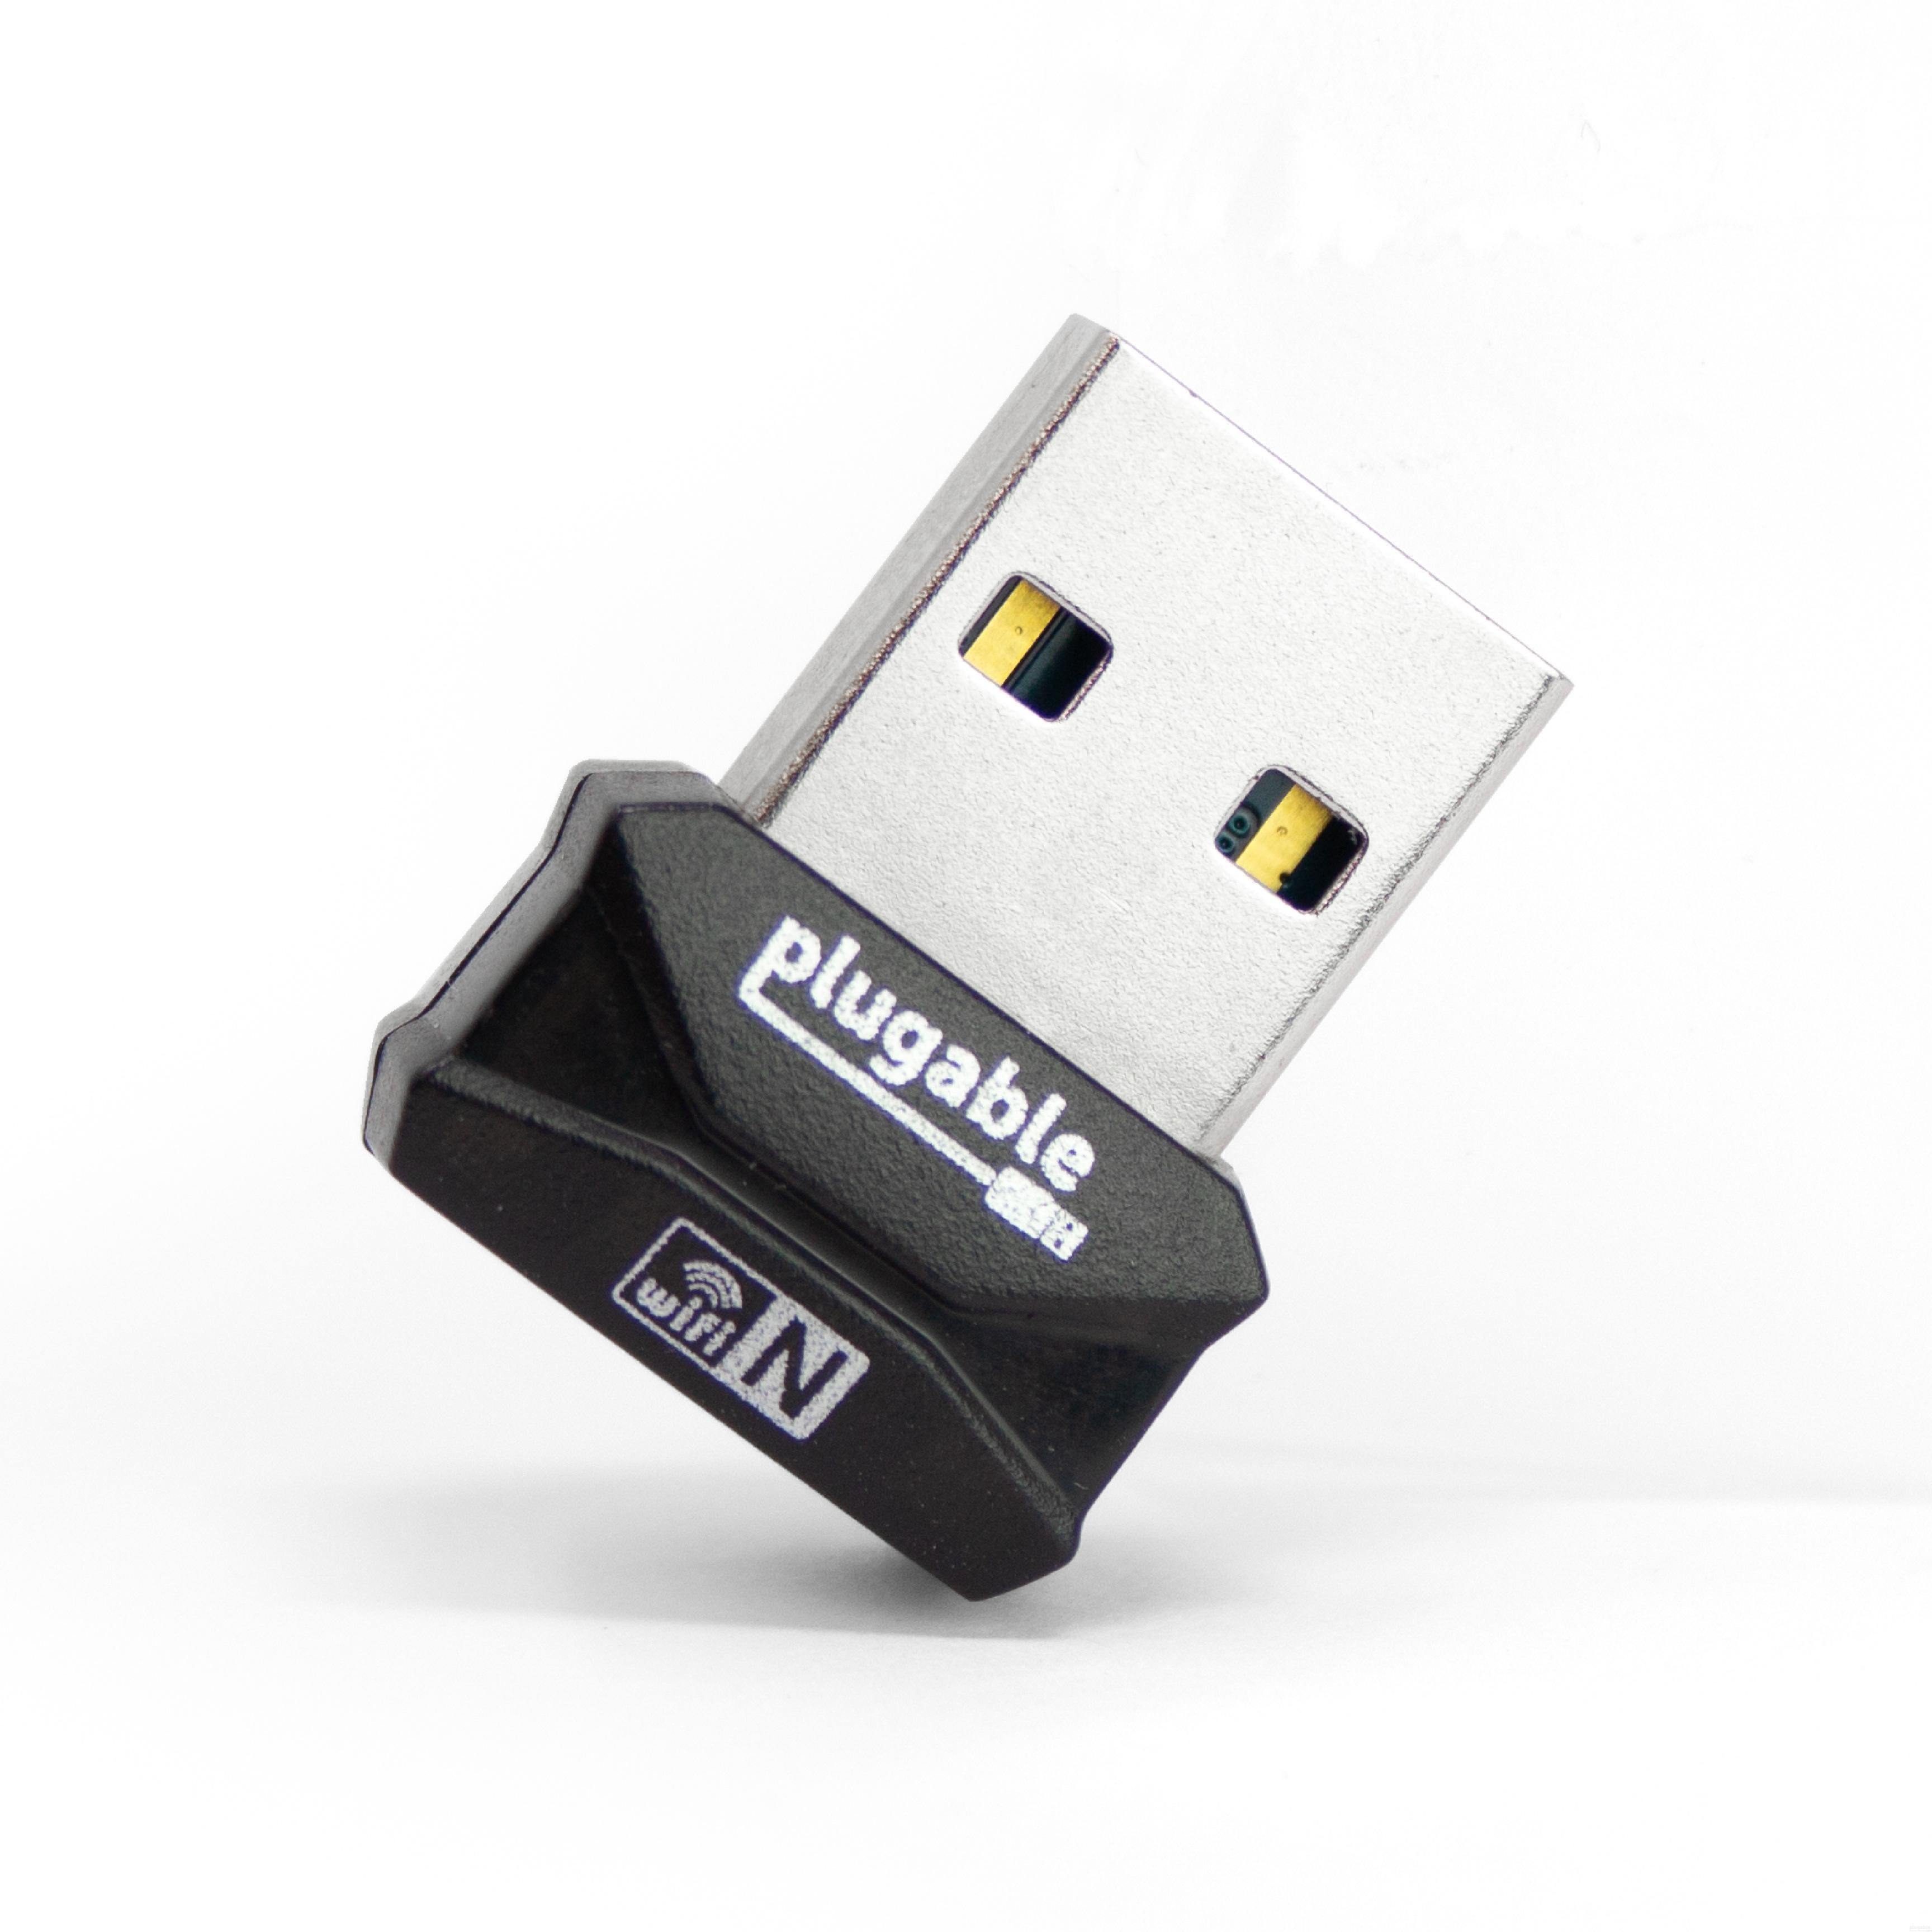 Northern Den anden dag Ruckus Plugable USB 2.0 802.11n Wireless Adapter – Plugable Technologies